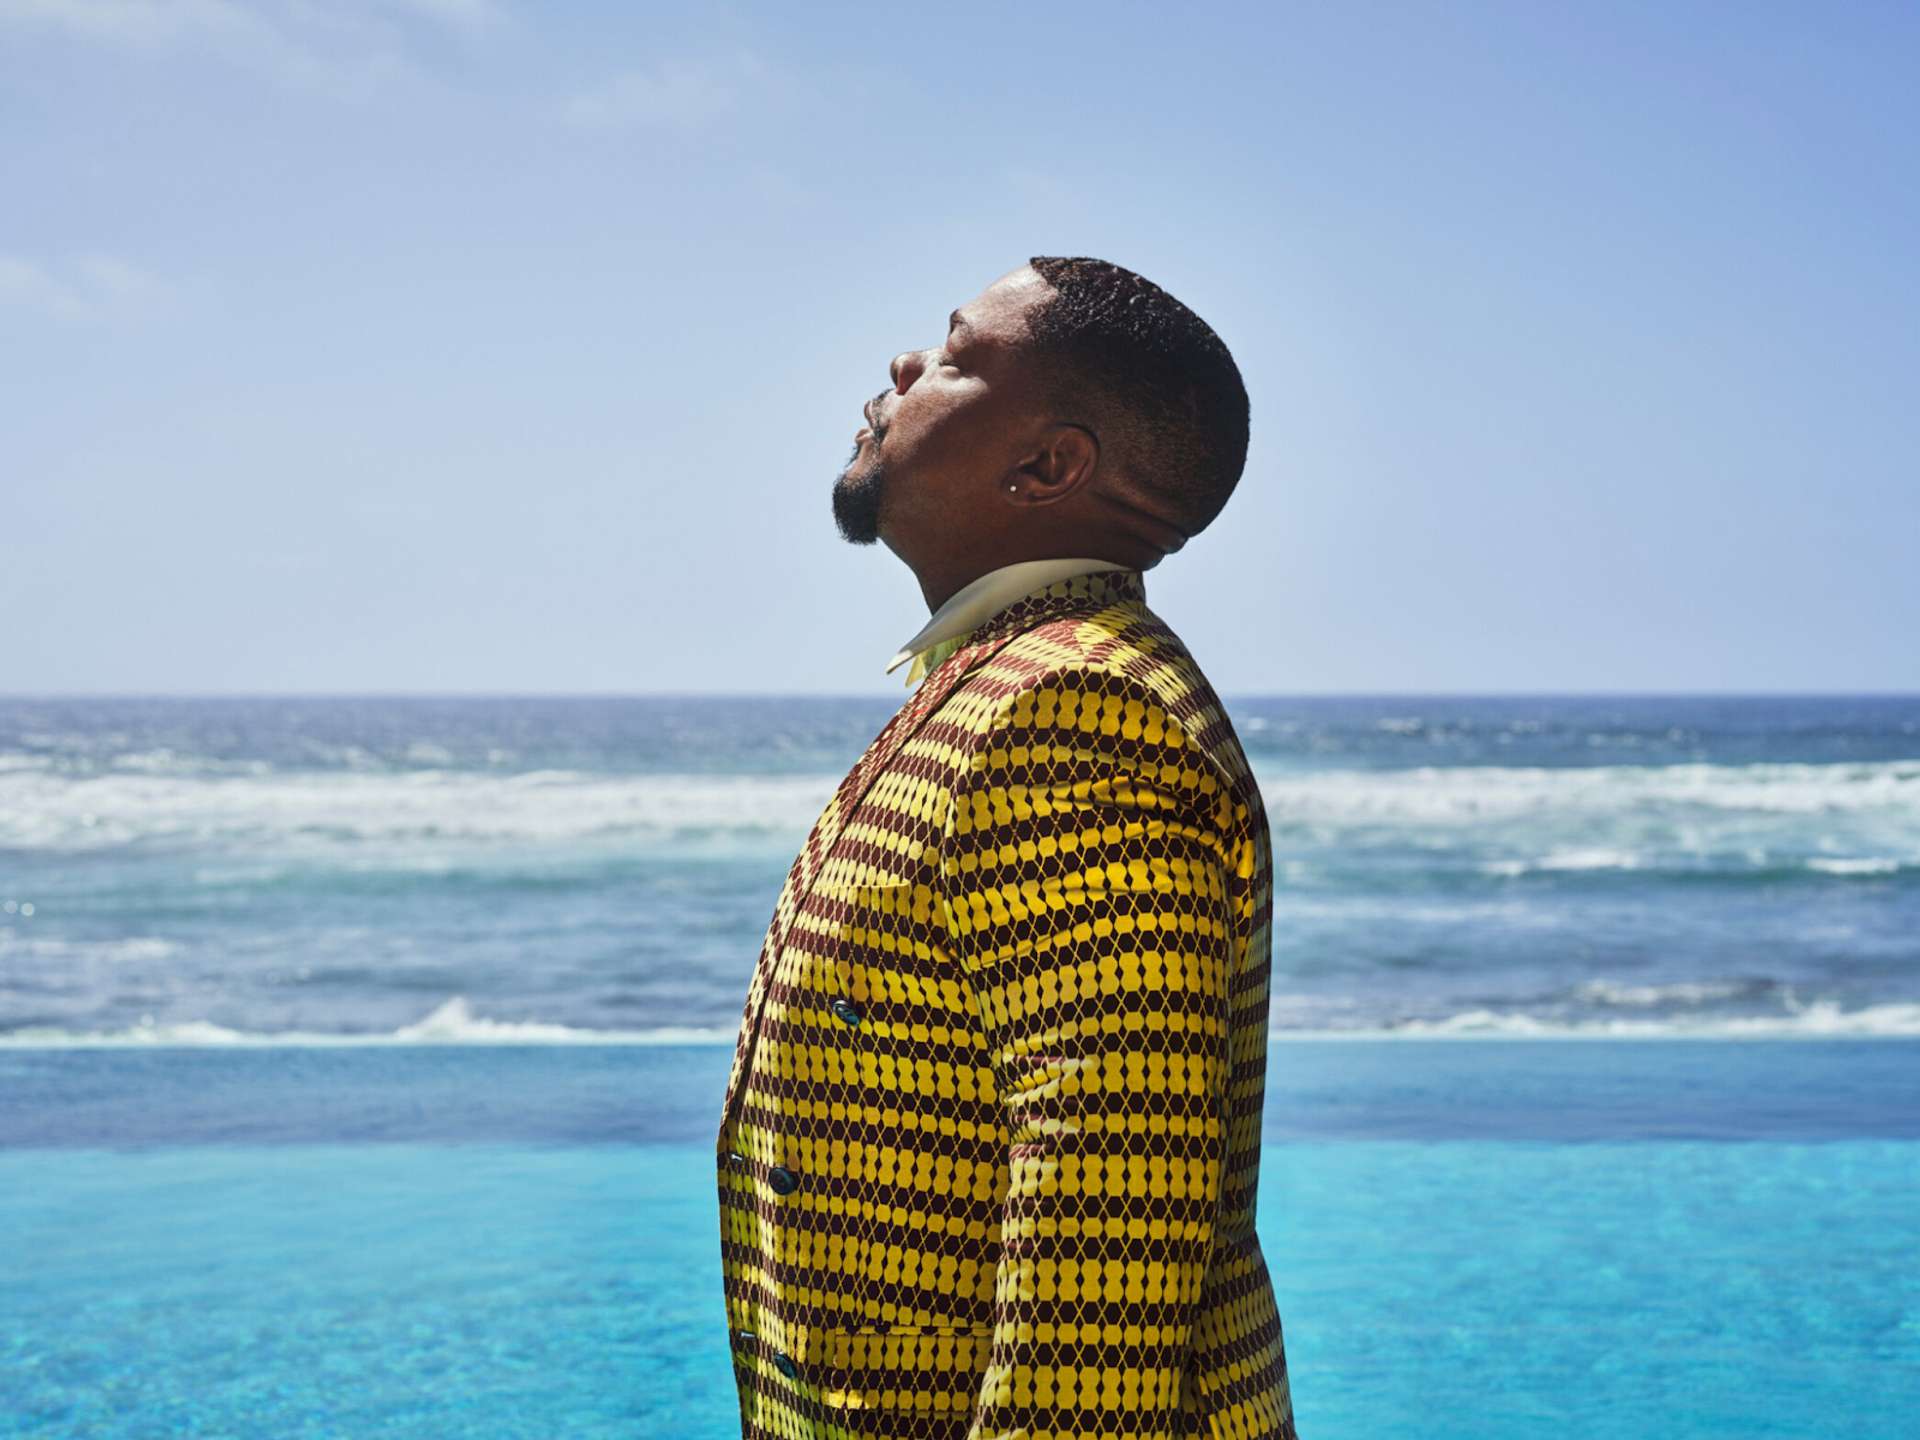 Profile view of Kehinde Wiley at his artist residence in Dakar, Senegal. He wears a yellow patterned blazer and looks up to the sky with his eyes closed; behind him, an infinity pool merges into a panorama of the ocean.